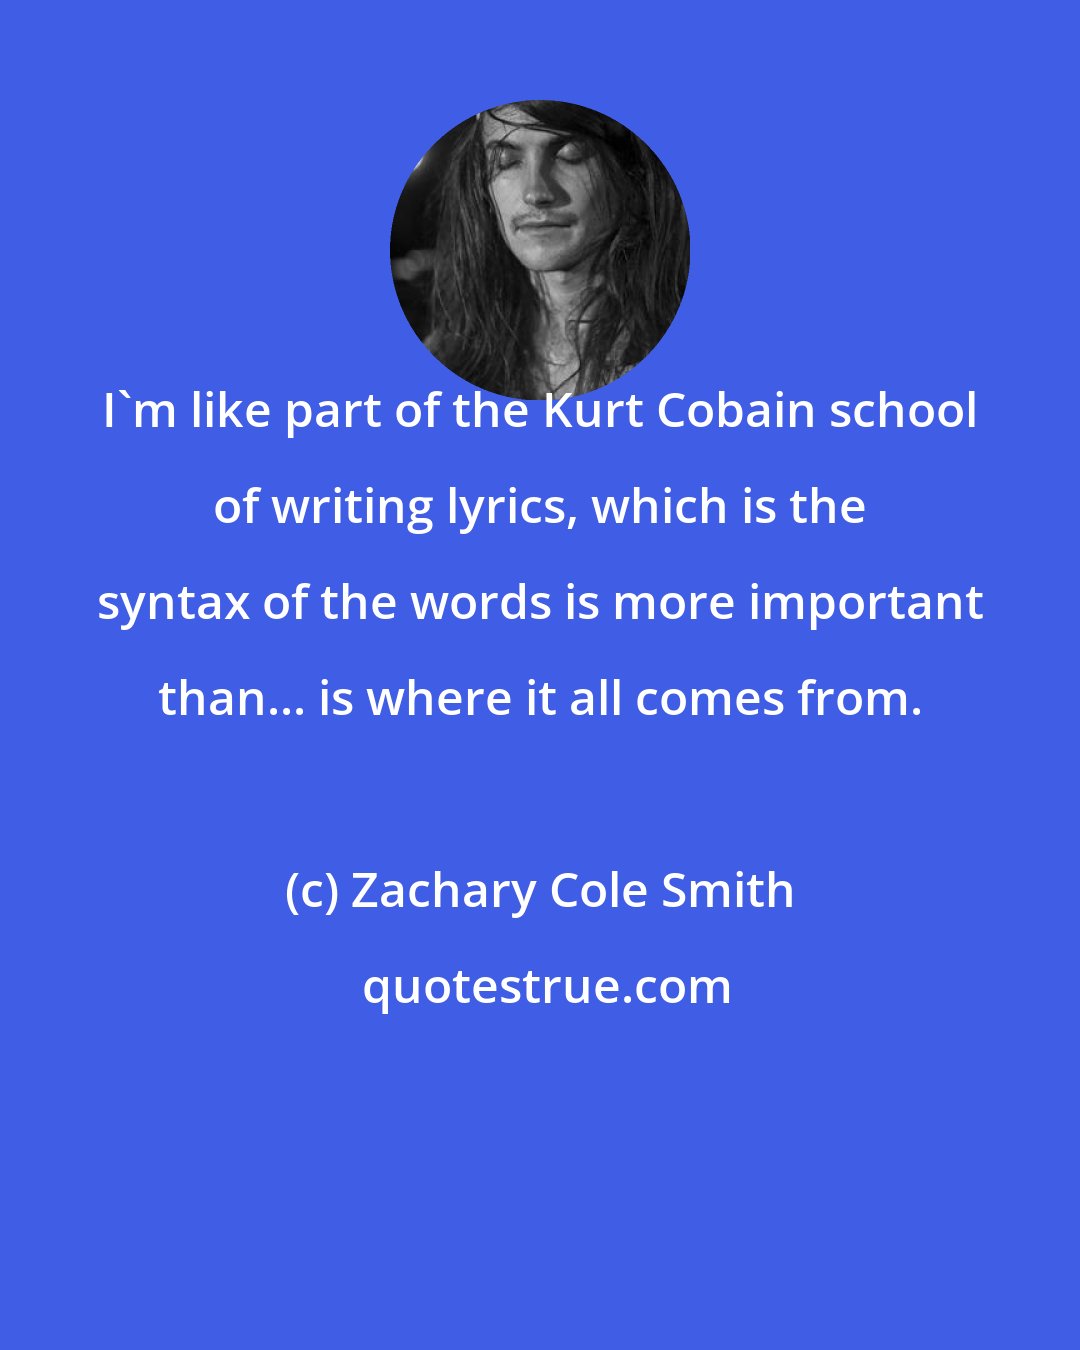 Zachary Cole Smith: I'm like part of the Kurt Cobain school of writing lyrics, which is the syntax of the words is more important than... is where it all comes from.